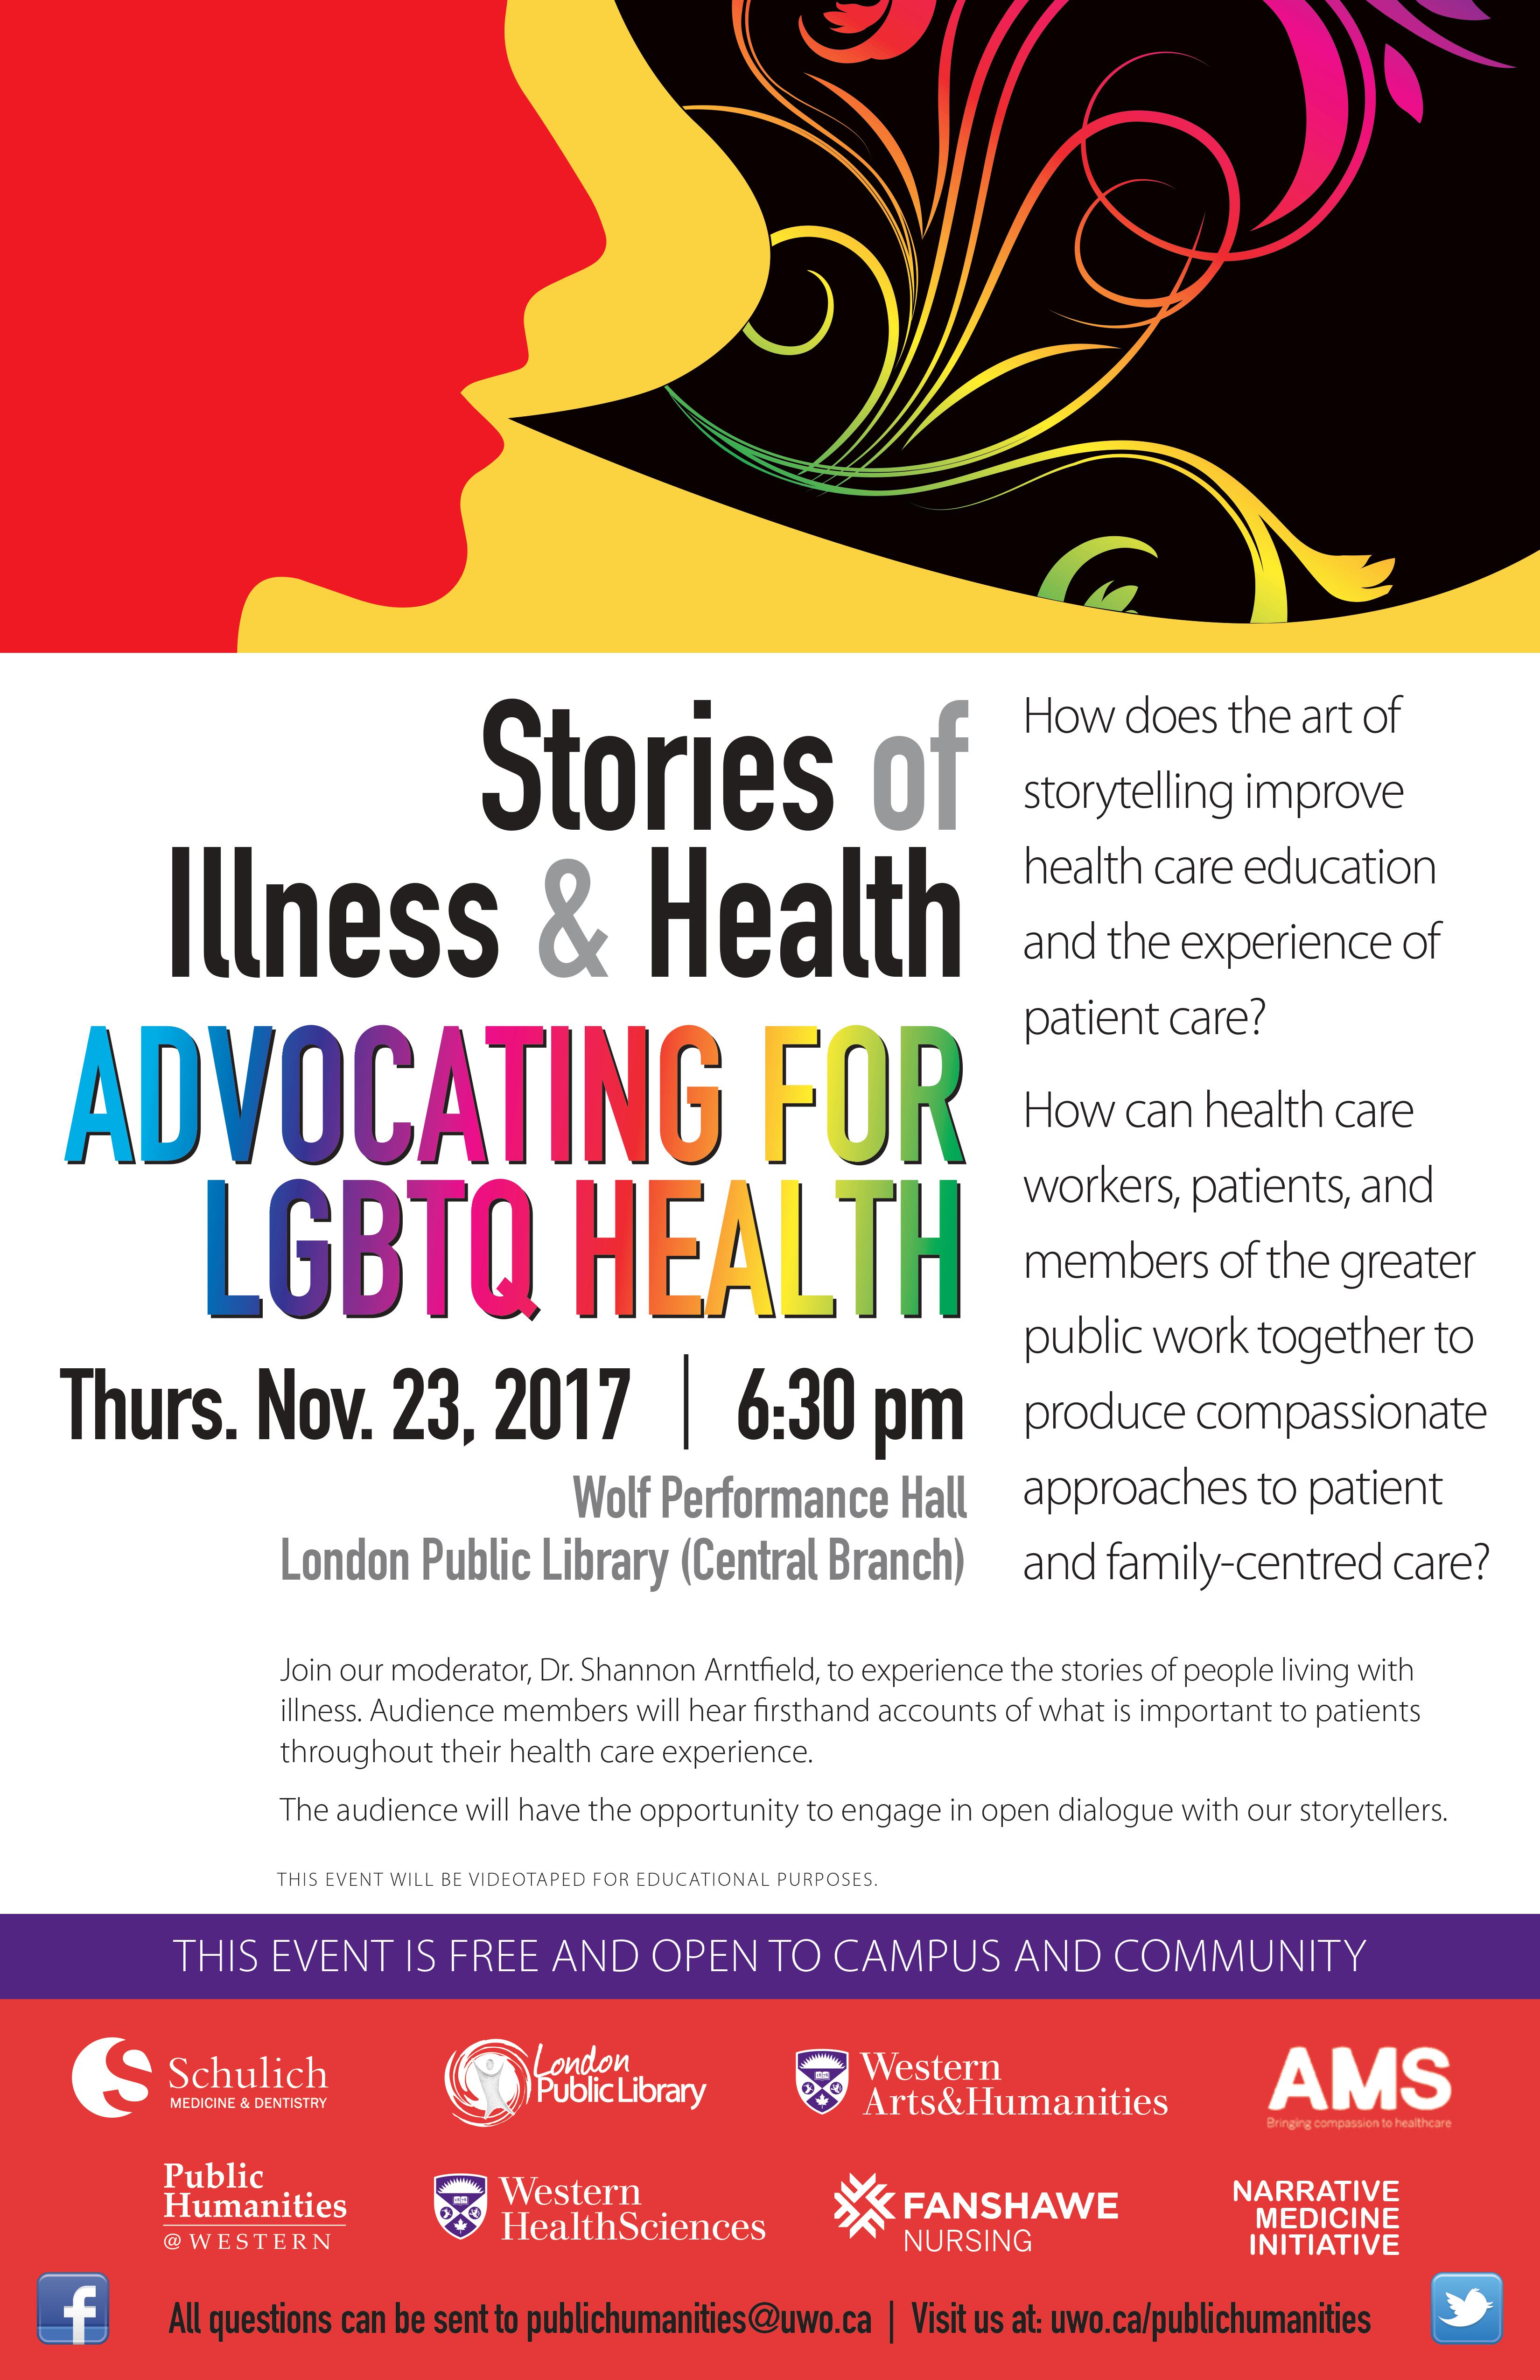 QueerEvents.ca - LGBT Stories of Health - Event Poster